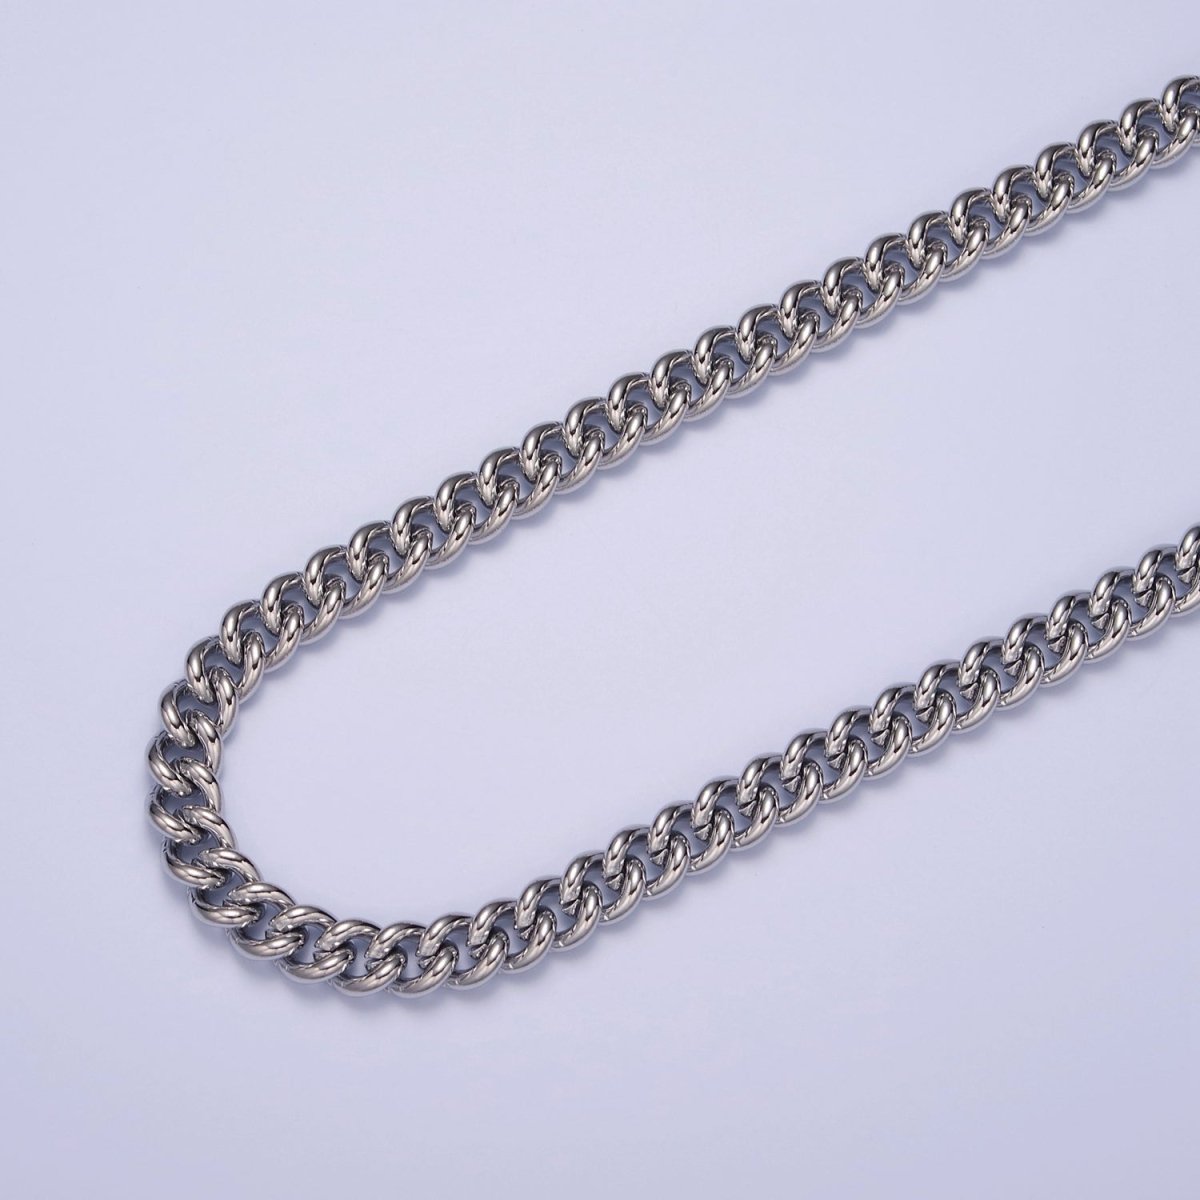 Silver Curb Link Unfinished Chain, 6mm Width 19.5 inch long | WA-1392 Clearance Pricing - DLUXCA